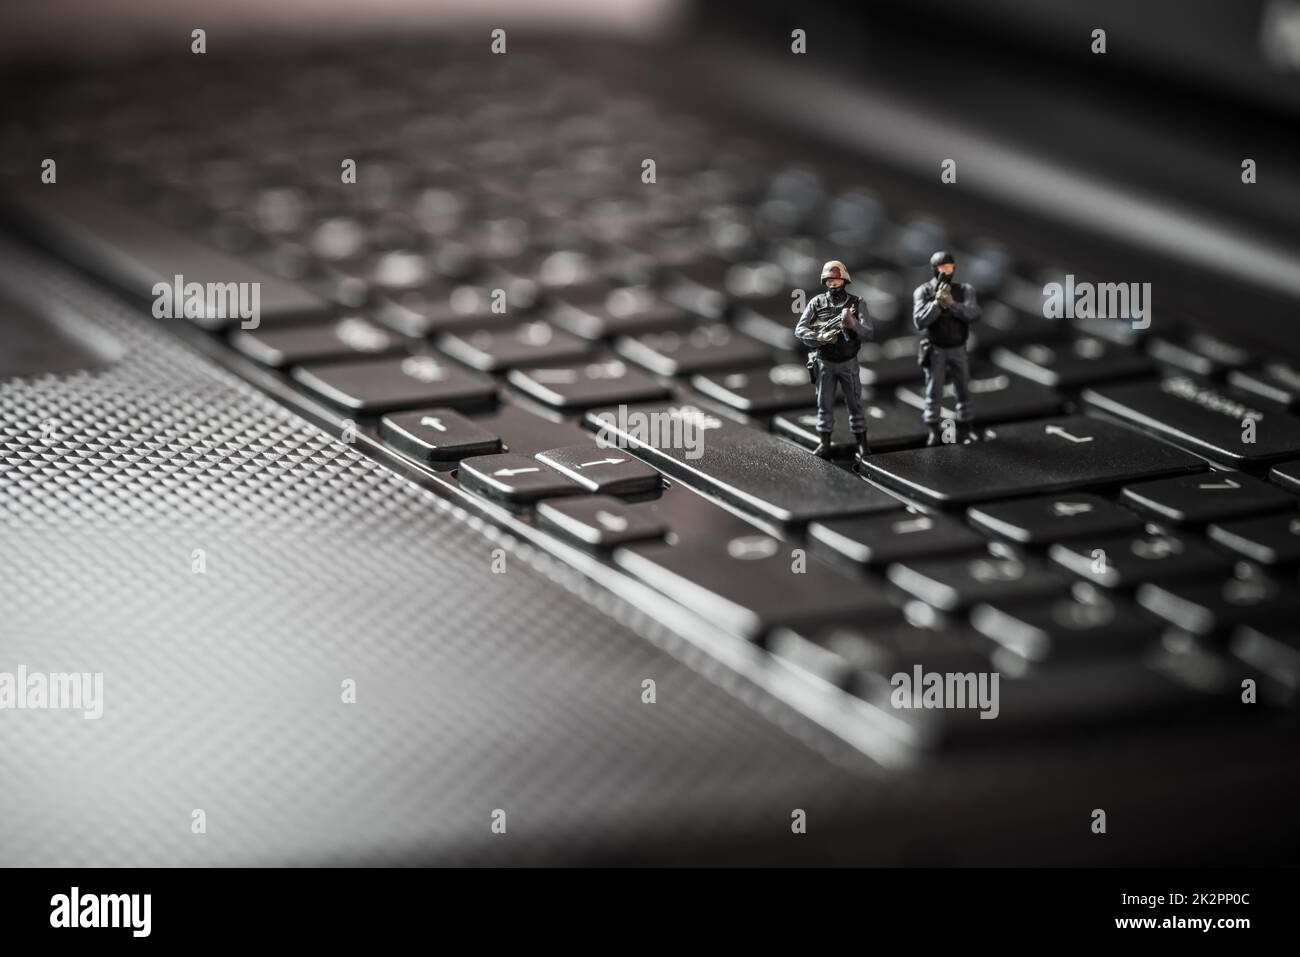 Miniature swat squad protecting laptop computer. Technology concept Stock Photo